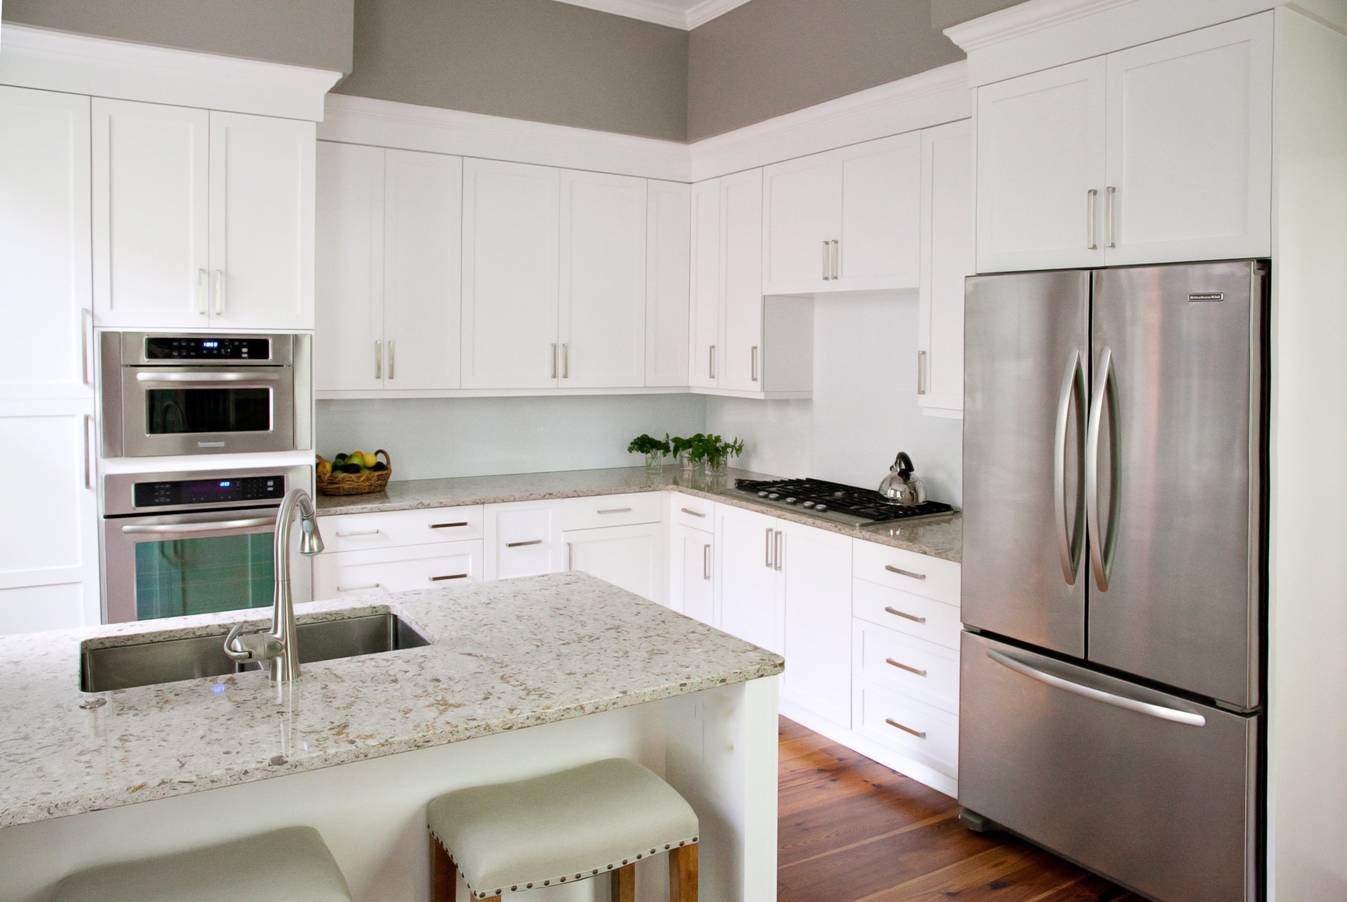 Kitchen Cabinet White
 Most Popular Kitchen Cabinet Colors in 2019